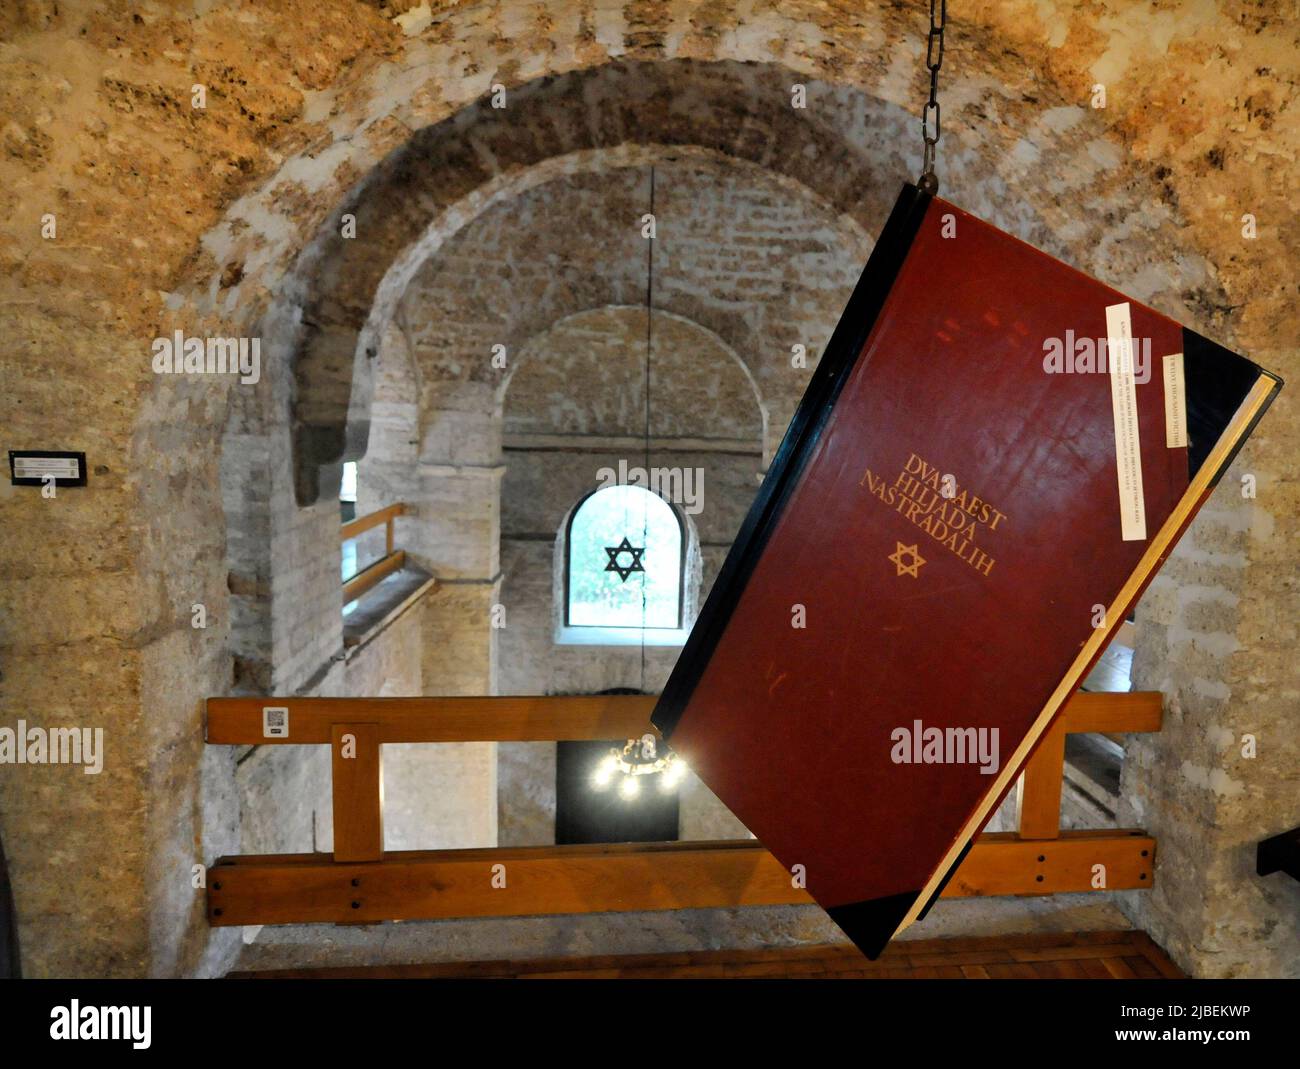 The book of the 12000 WW2 victims displayed at the Jewish museum located in the old Sephardi synagogue in Sarajevo, Bosnia and Herzegovina. Stock Photo